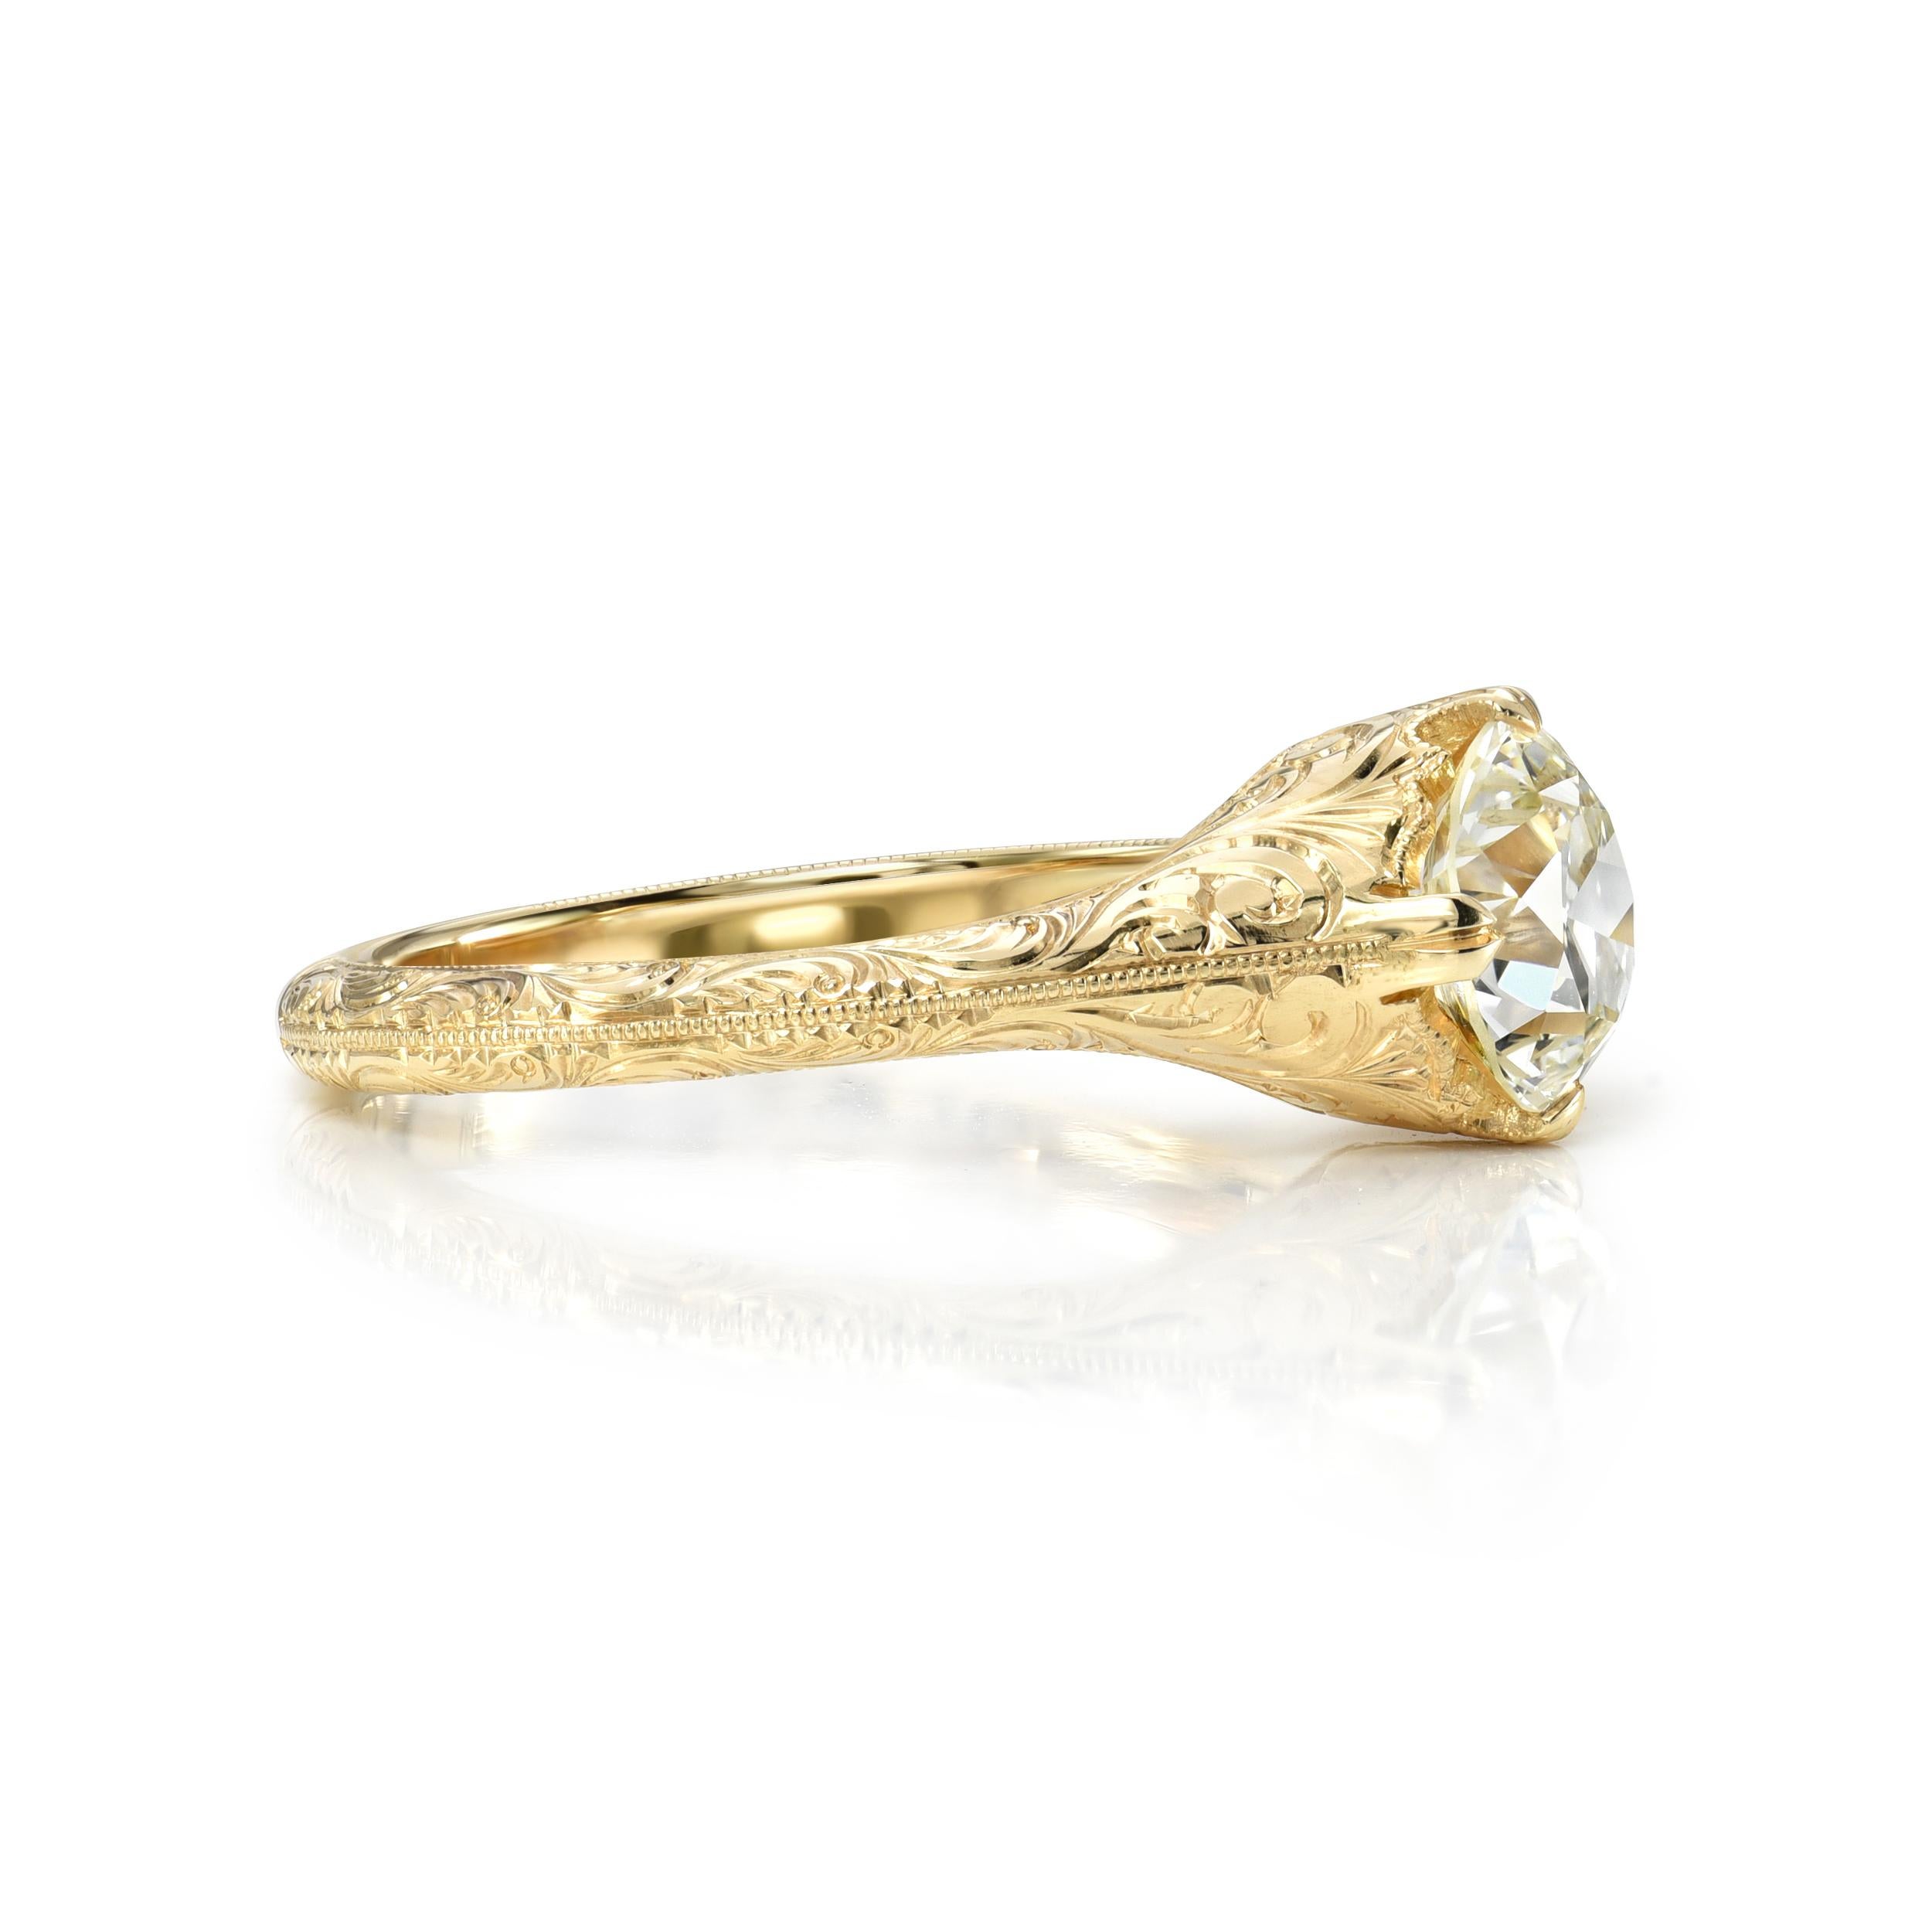 1.05ct L/VS2 GIA certified old European cut diamond prong set in a handcrafted 18K yellow gold mounting.